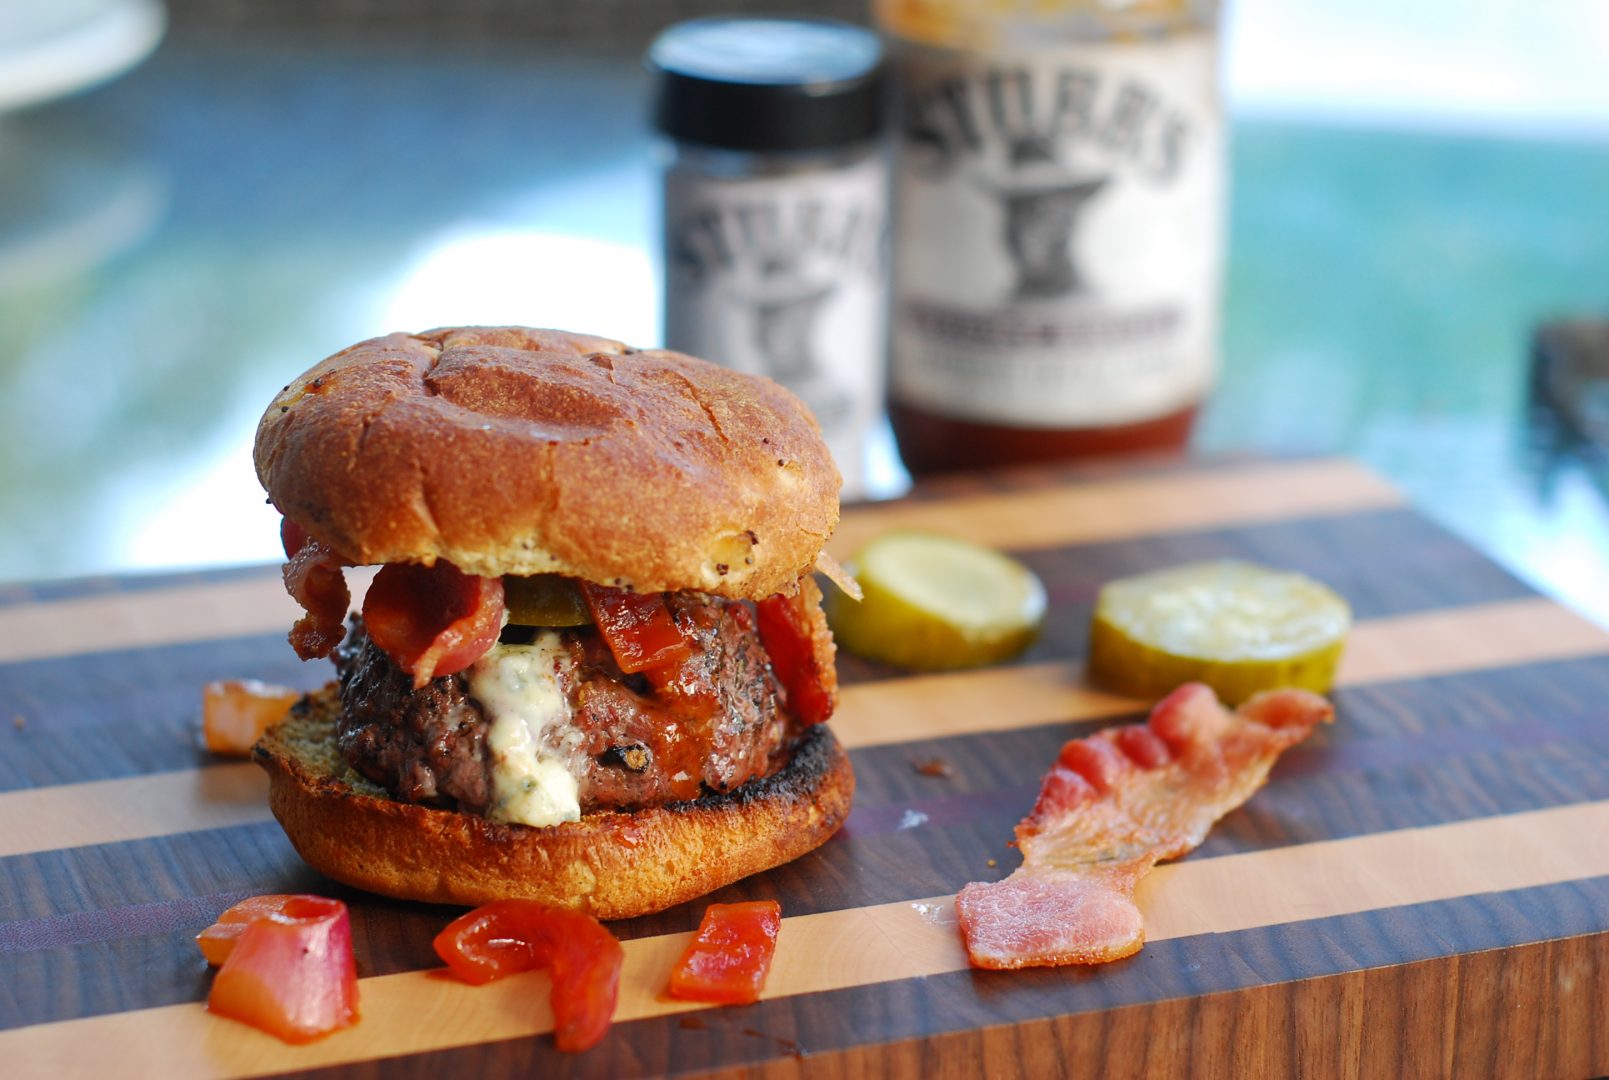 Top 5 Burgers to Make for Memorial Day